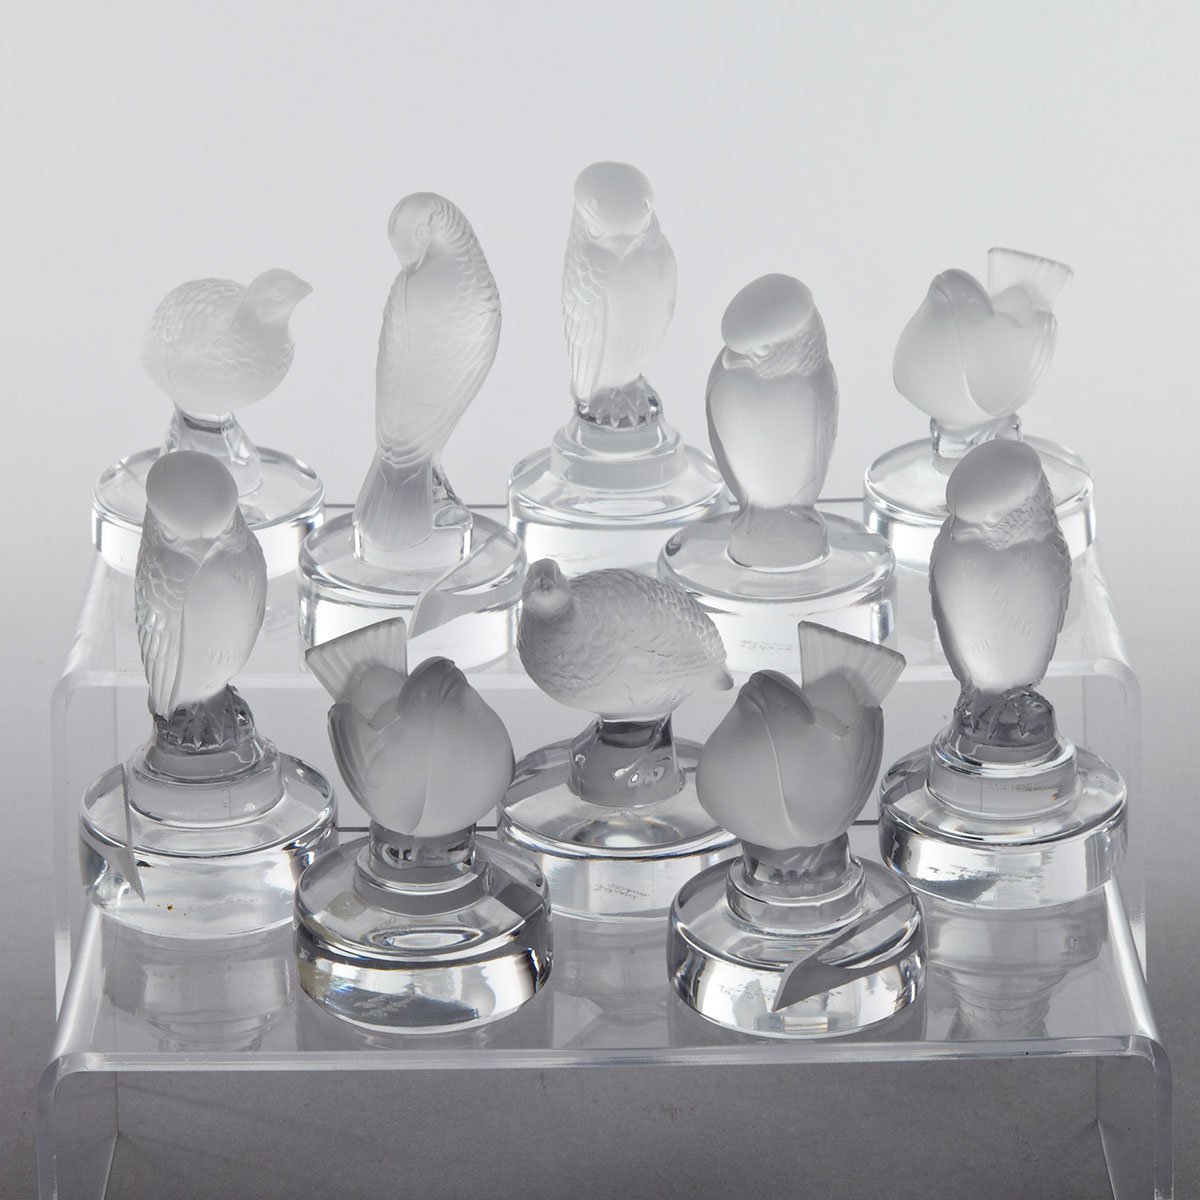 Ten Lalique Moulded and Partly Frosted Glass Bird Place-Card Holders, post-1945